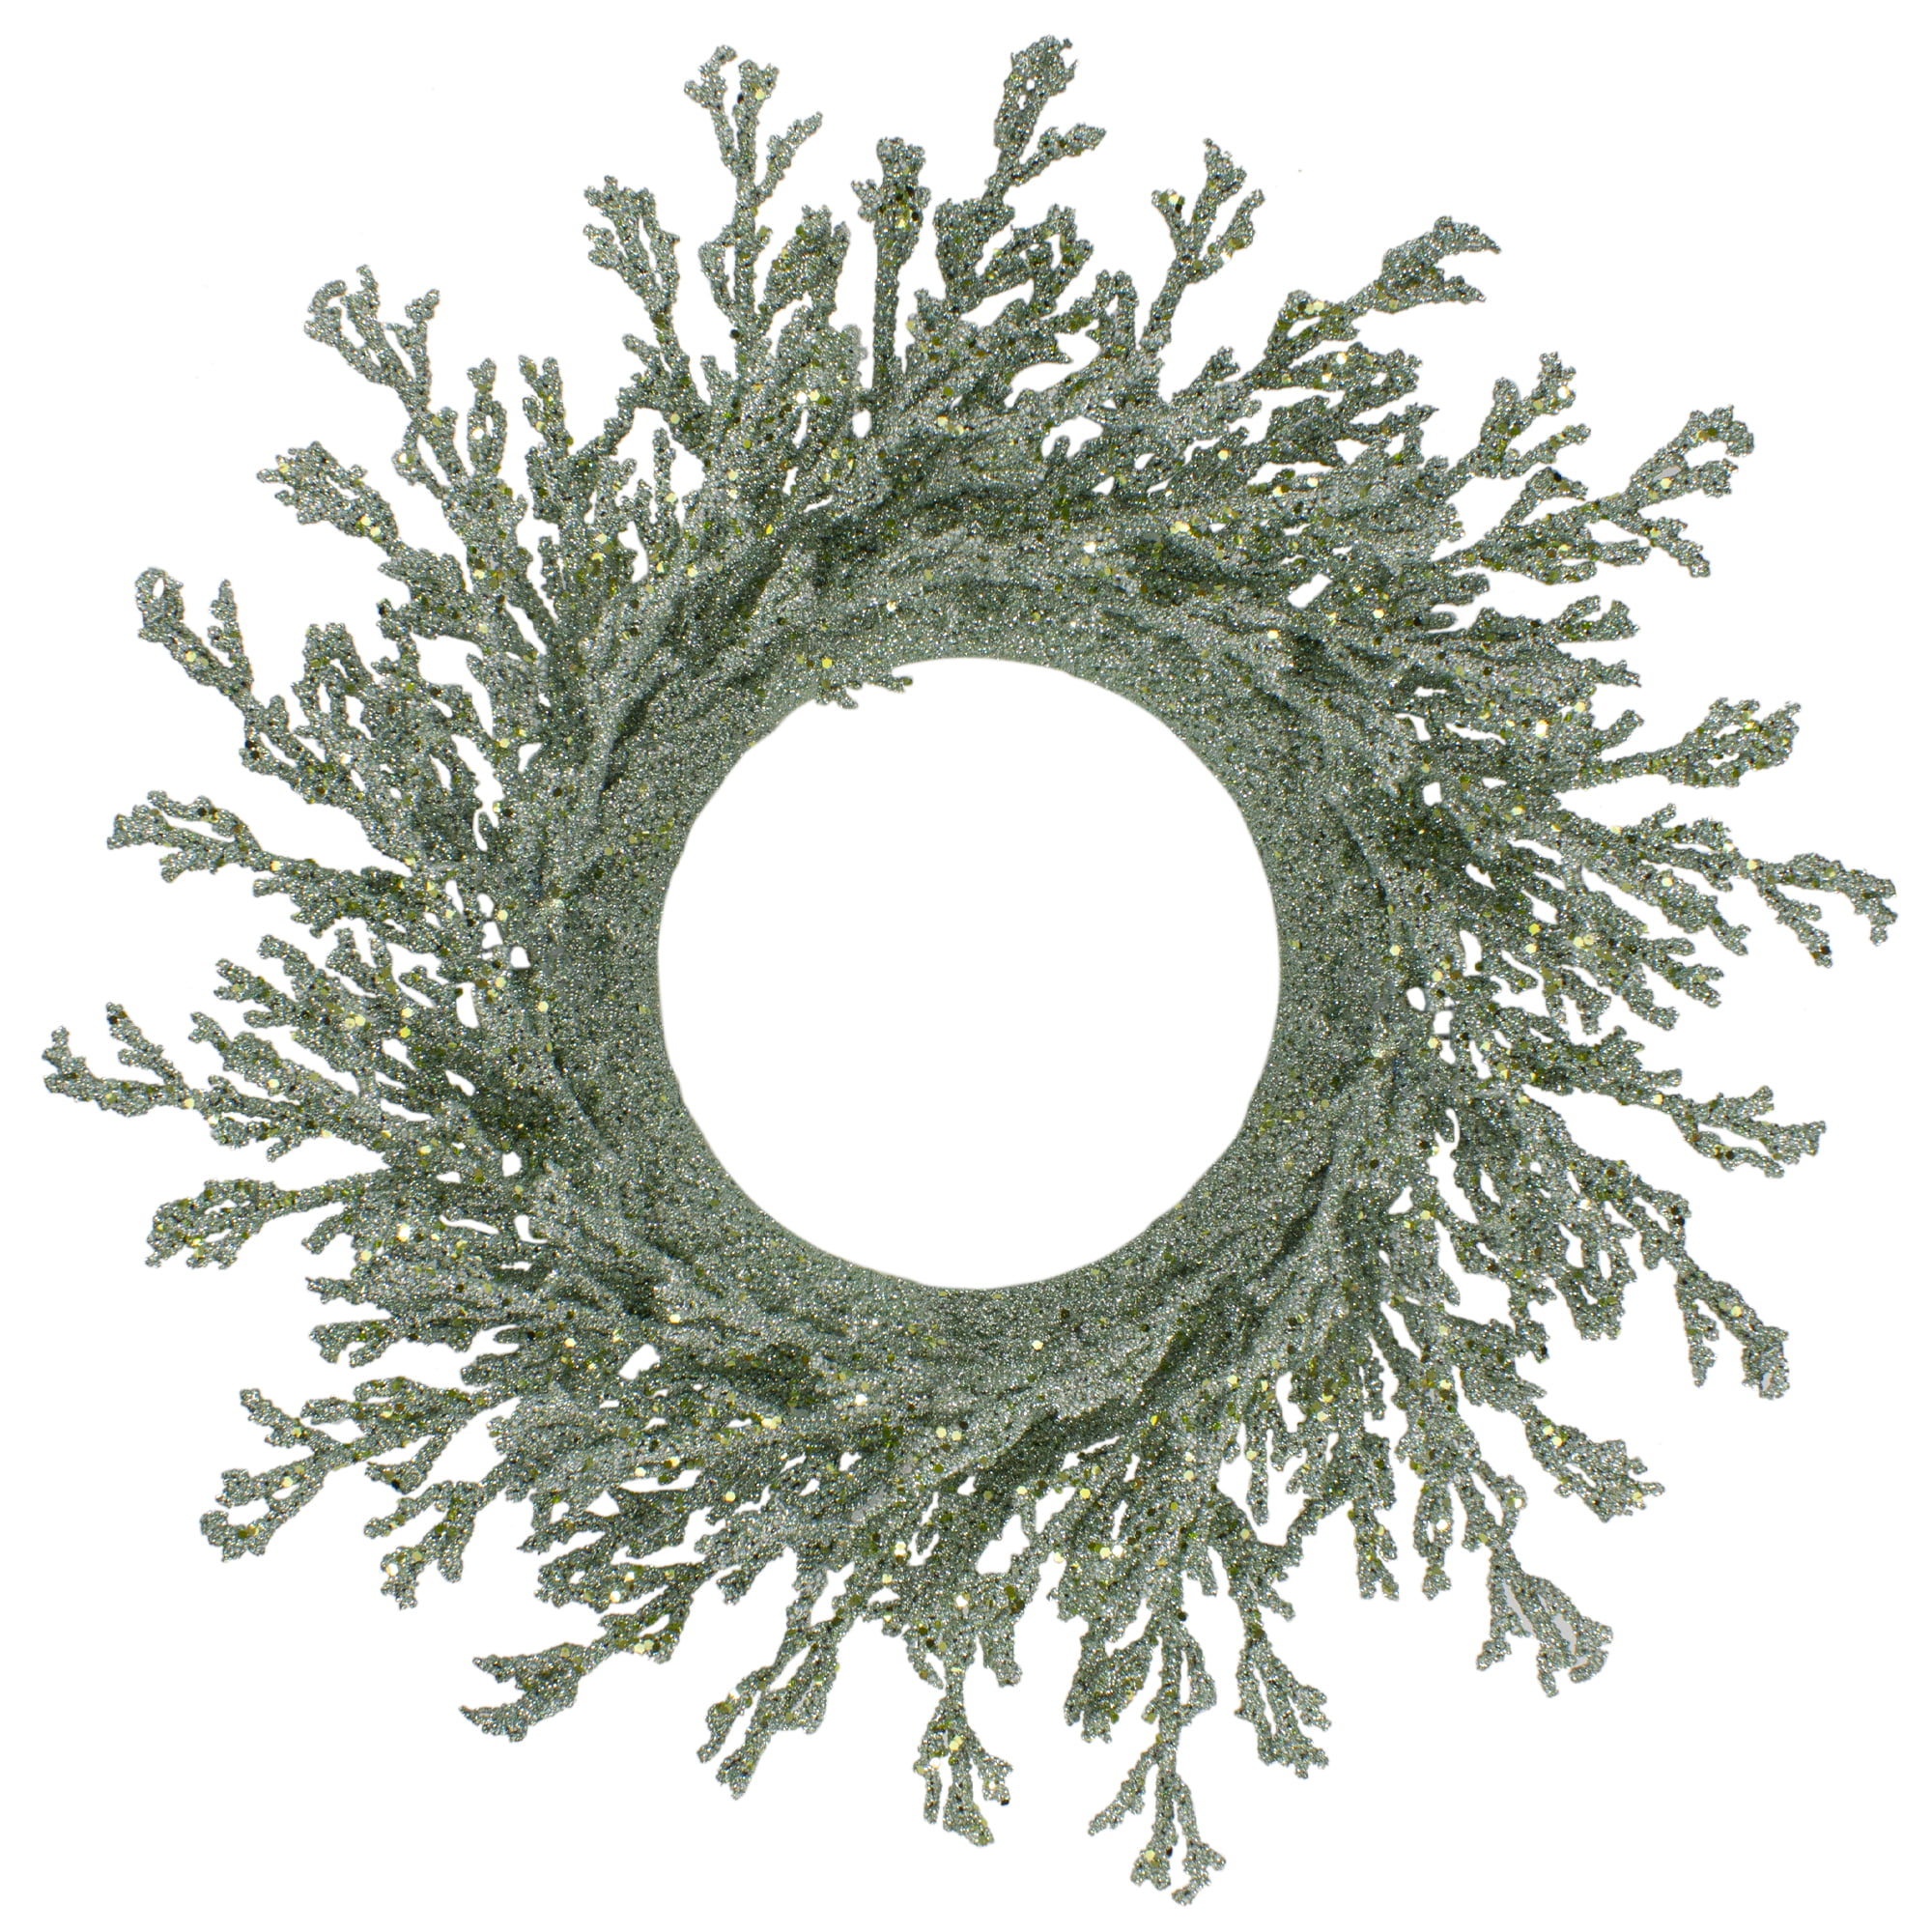 SALE 14 " Cypress X 4.5 " inside measure Wreath or Candle ring 